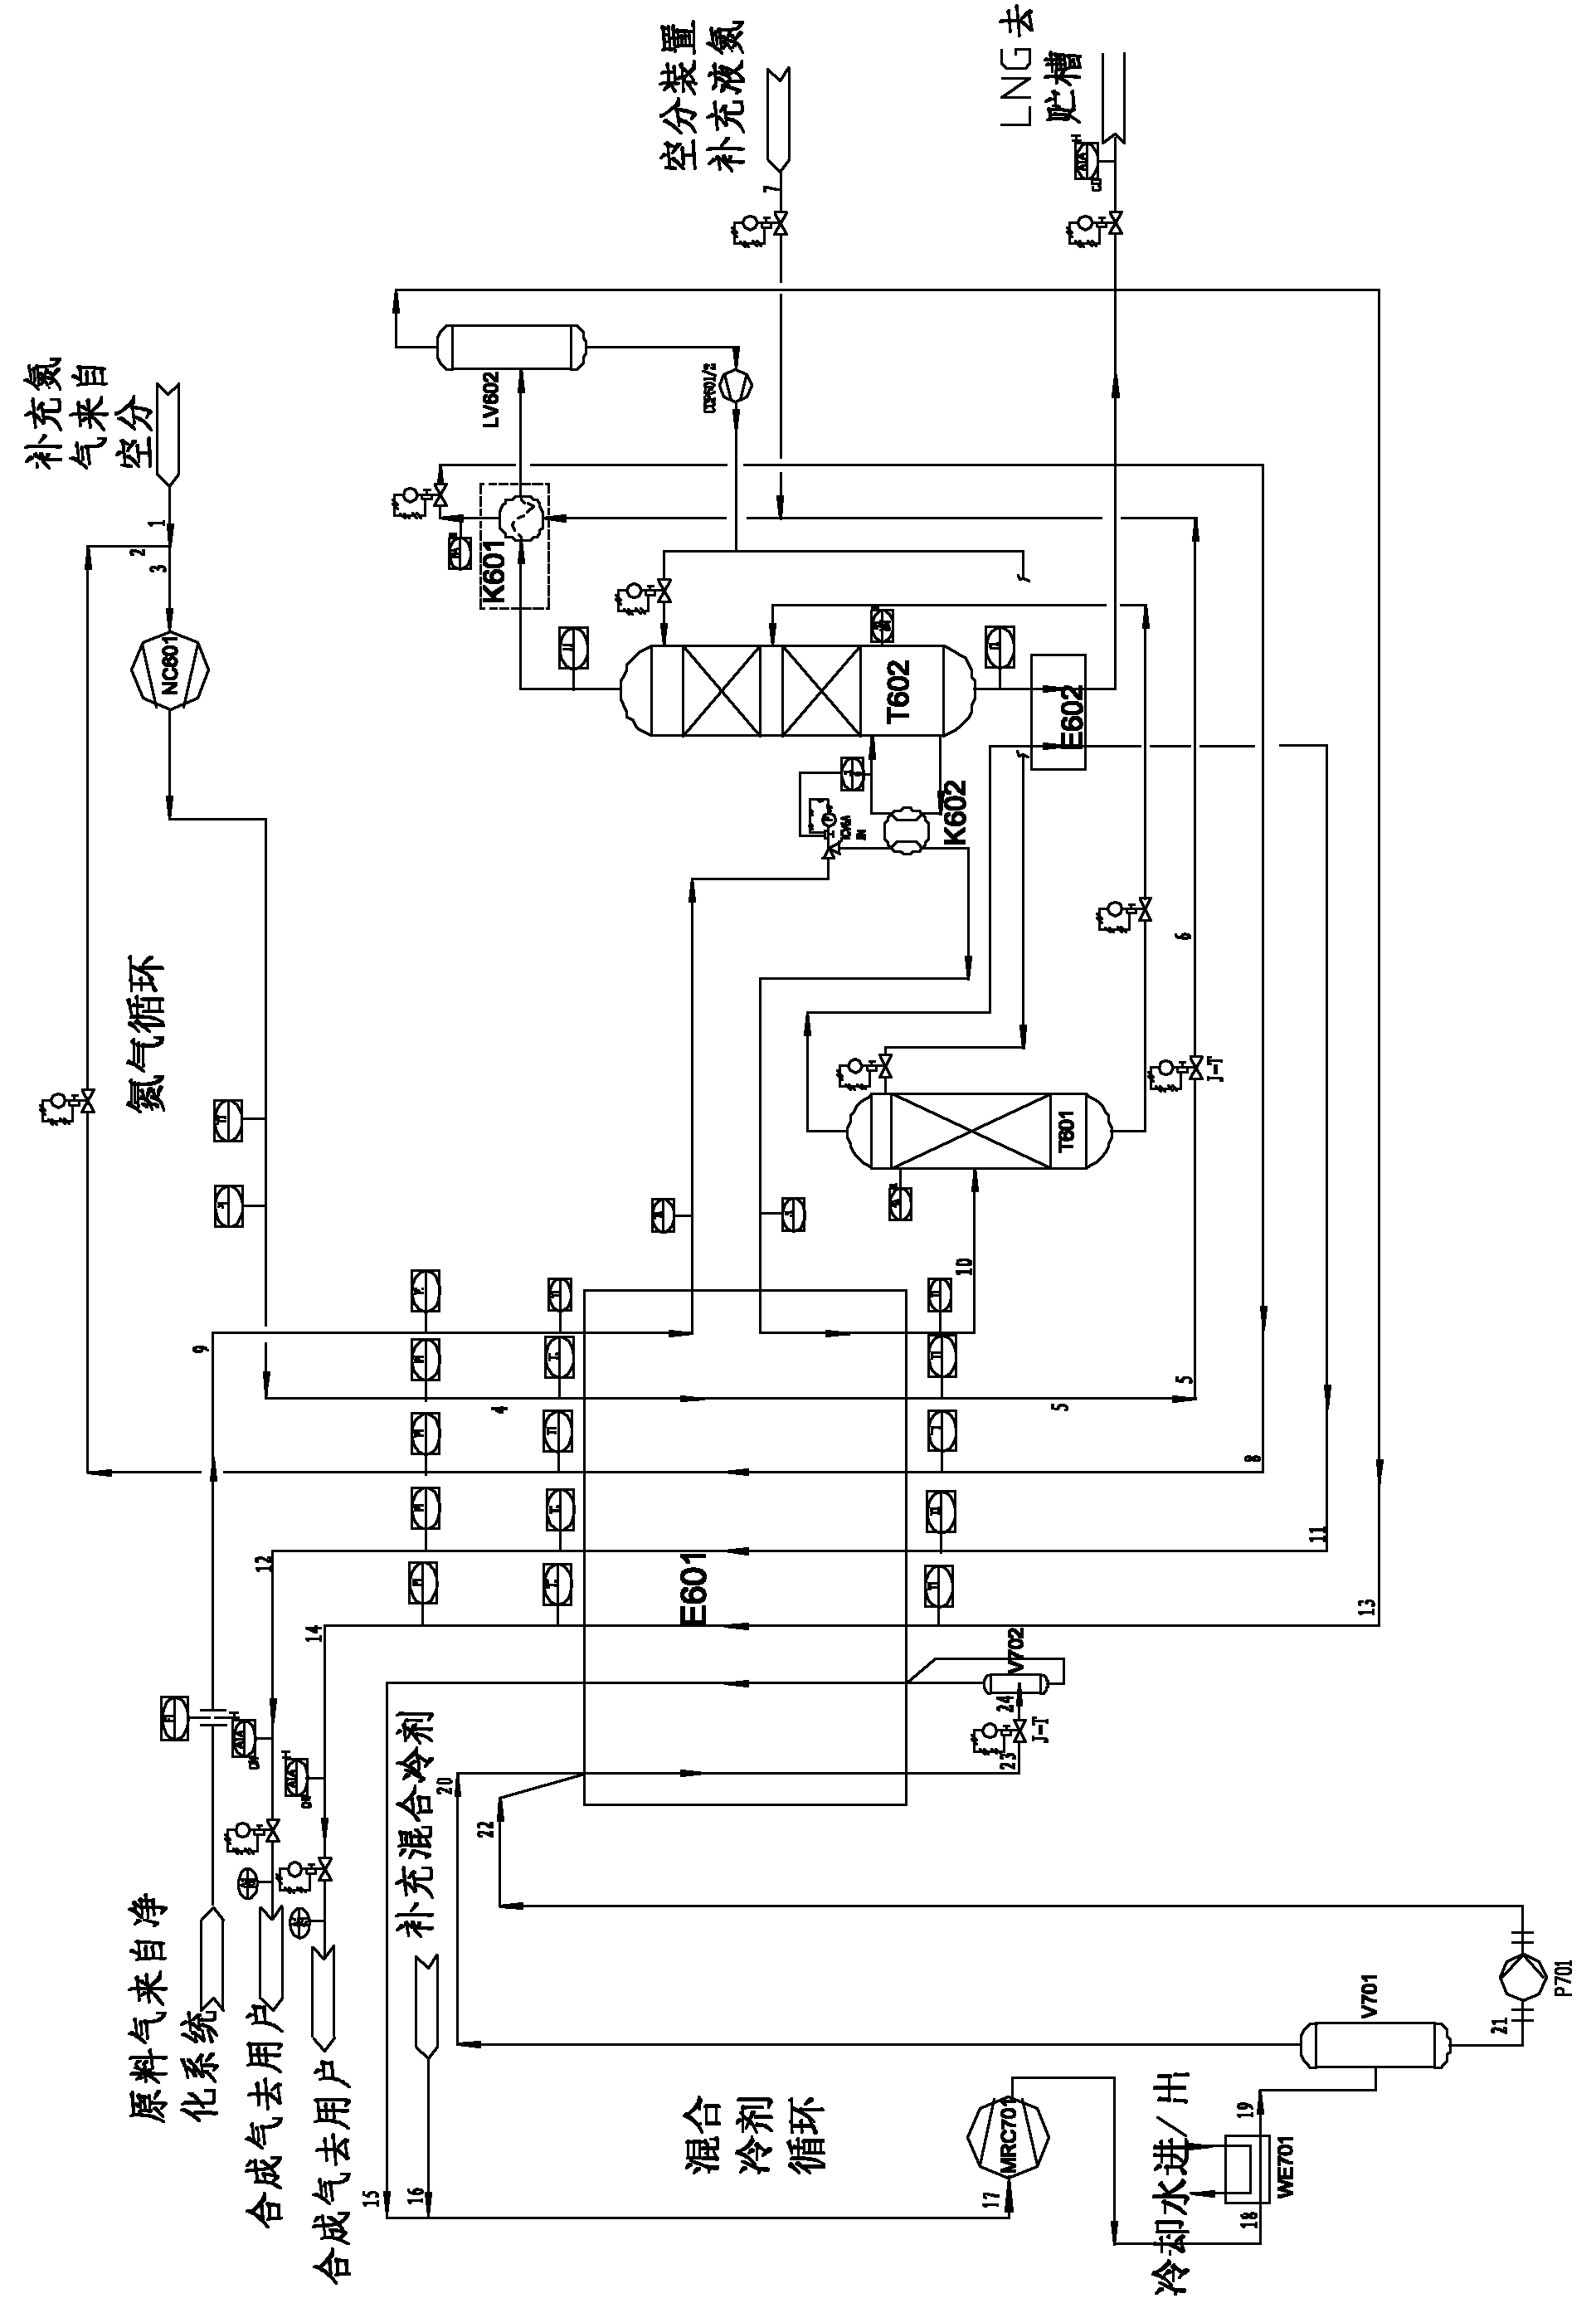 Heat exchange system for cryogenic separation device for coal gasification device feed gas methane